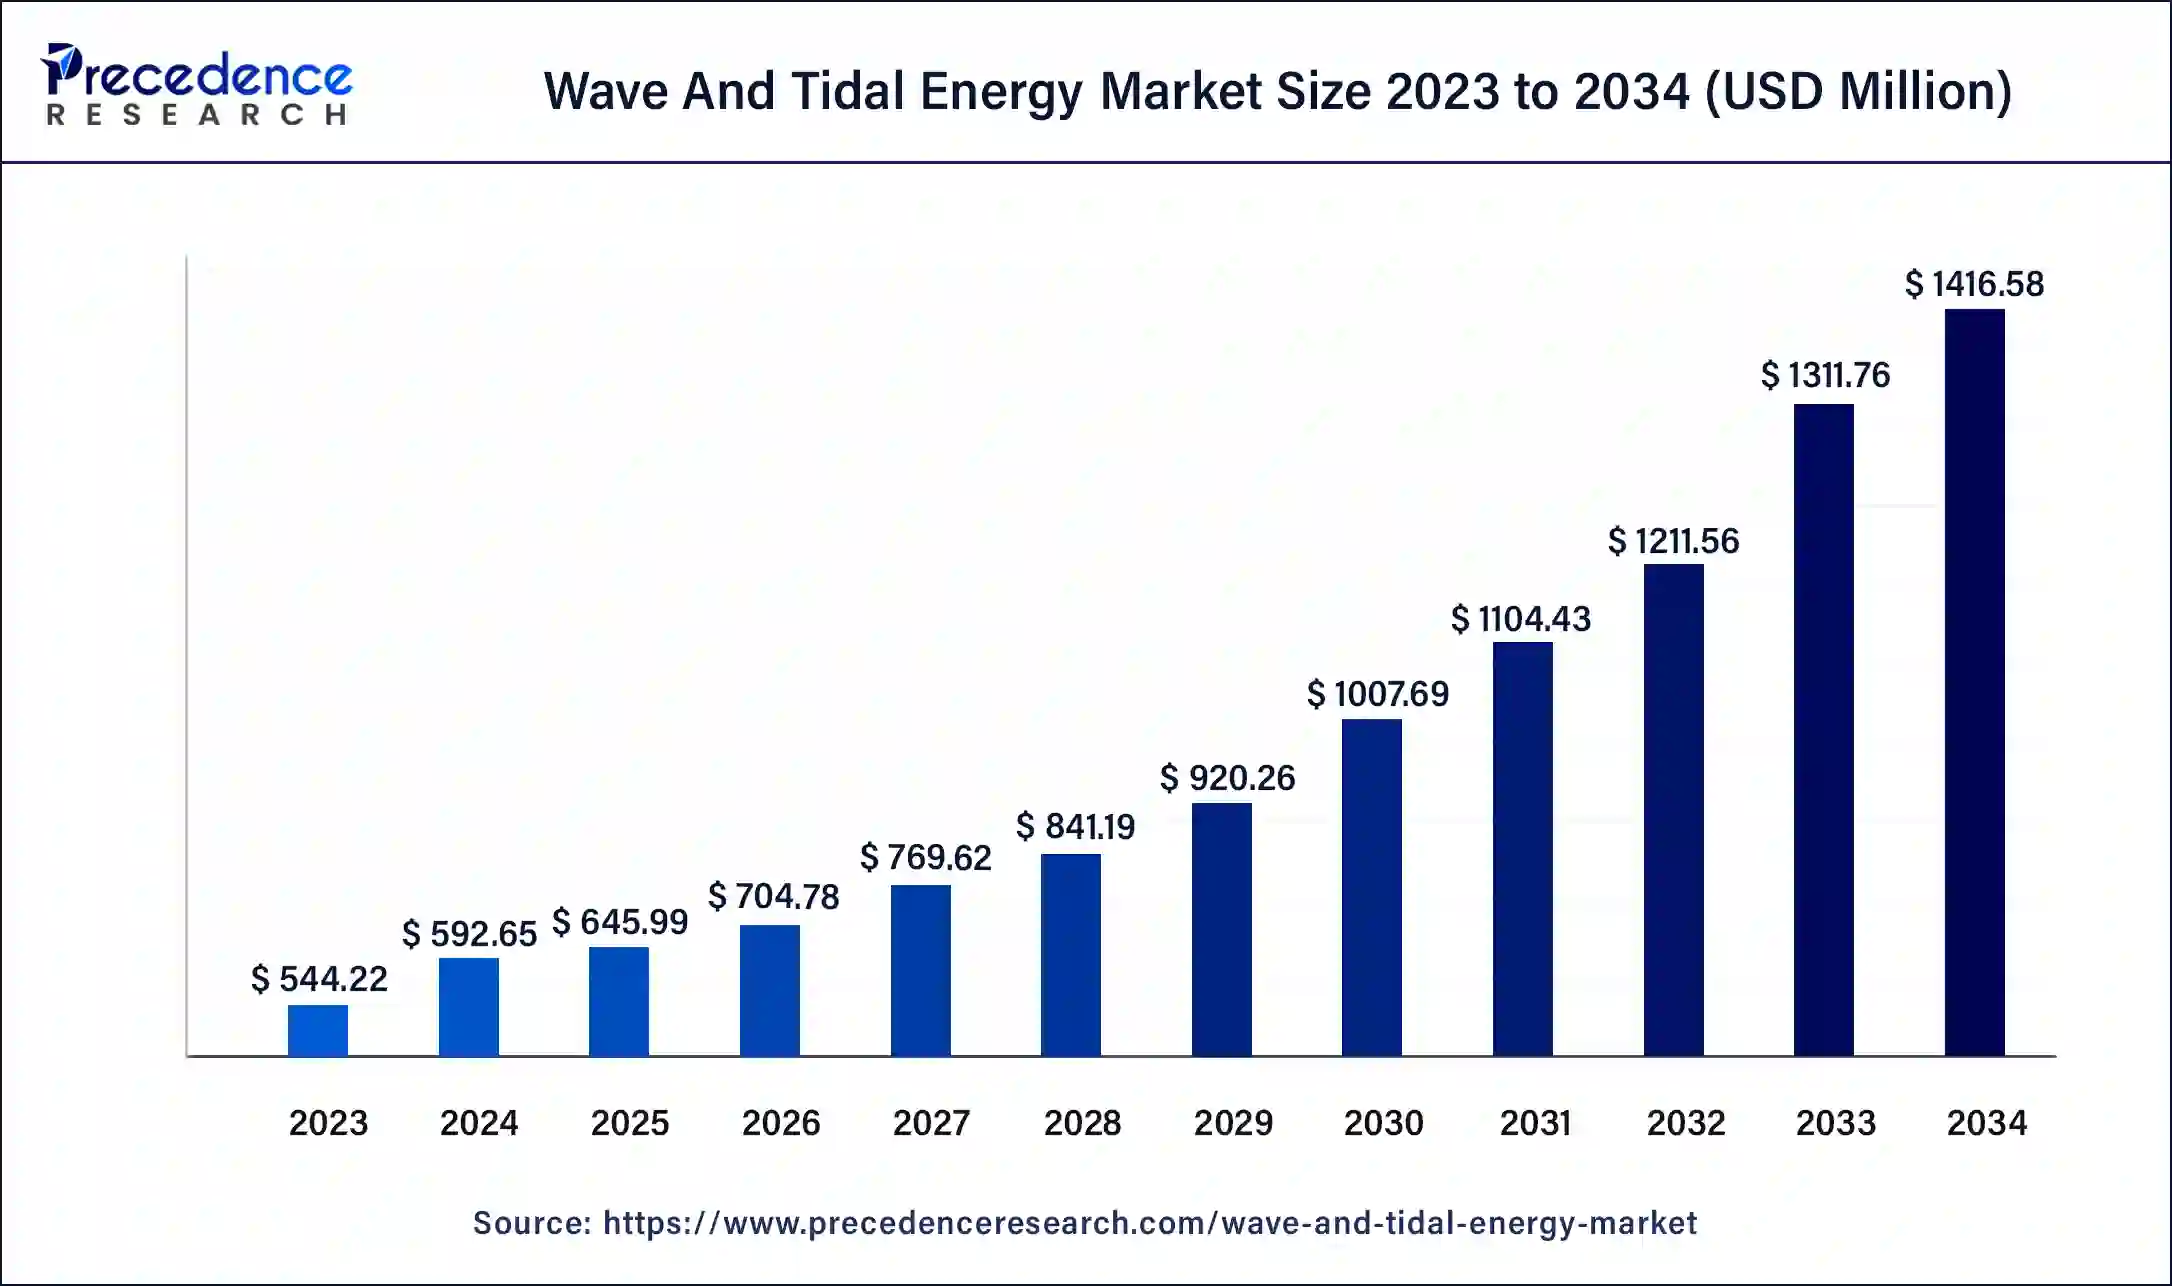 Wave and Tidal Energy Market Size 2024 To 2034